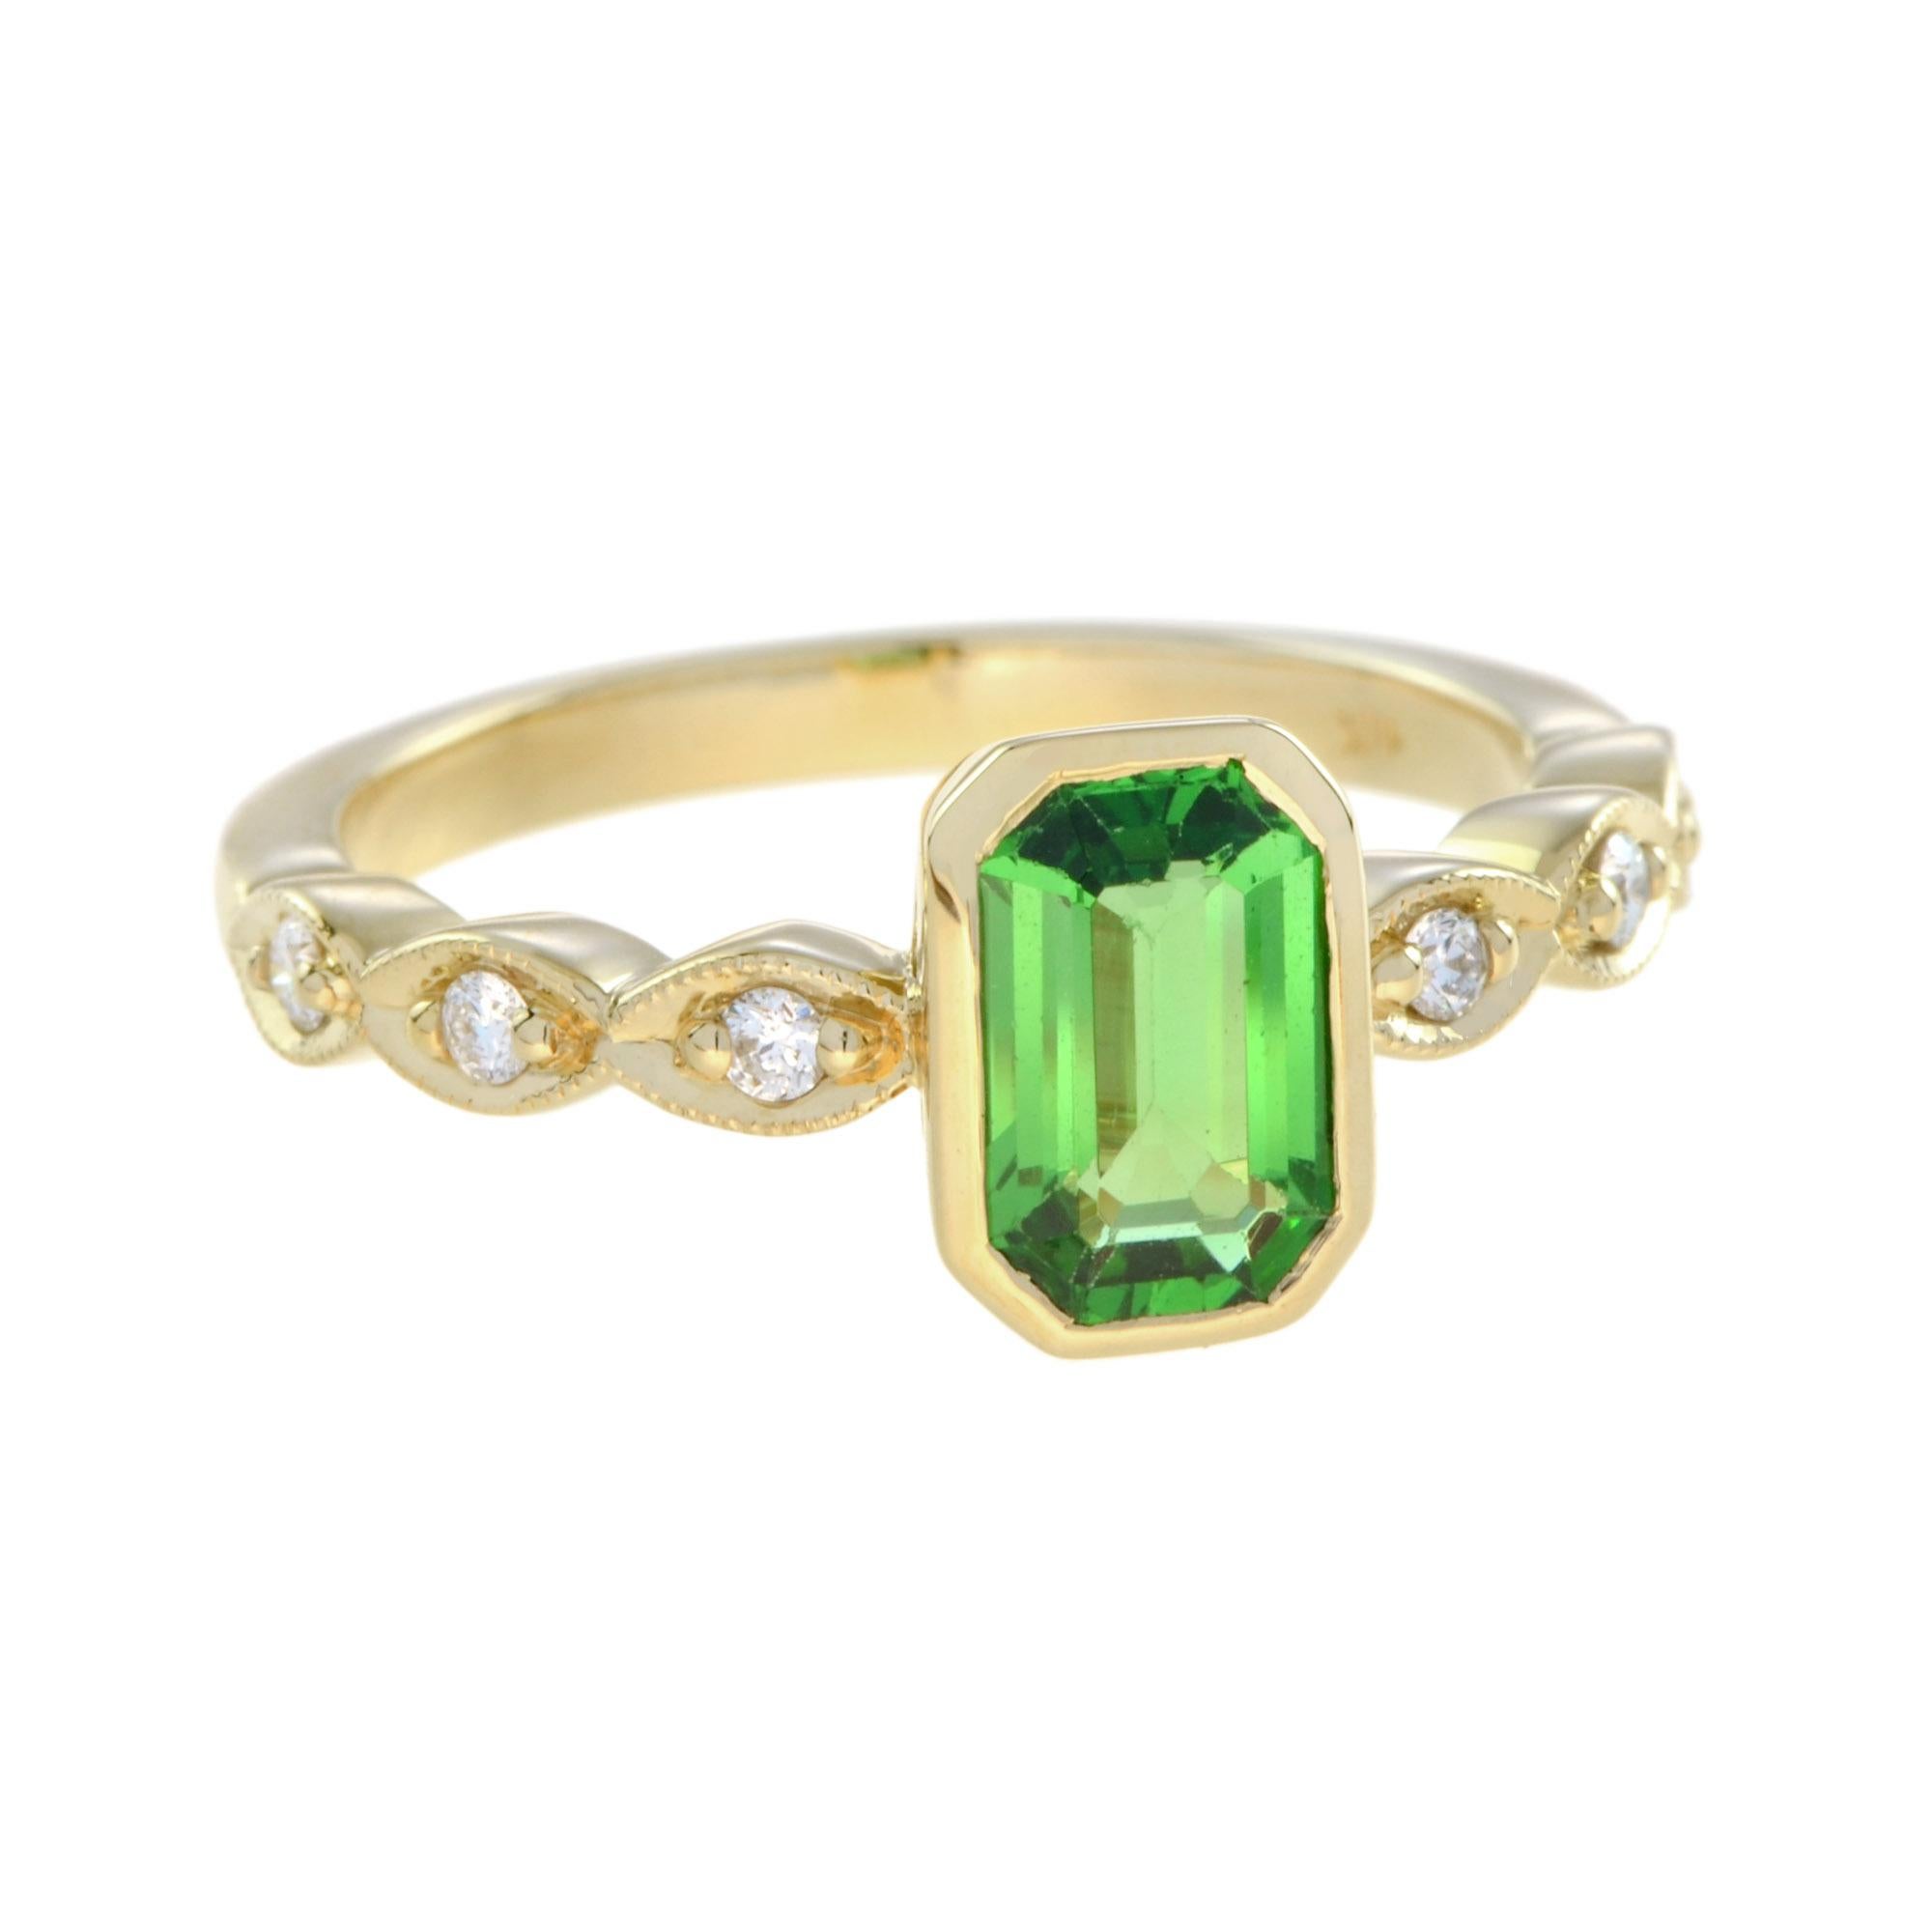 This gorgeous pretty ring is beautifully set with an emerald cut natural tsavorite and round diamonds on shoulders. The intense green color tsavorite  is in bezel setting. The diamonds each set into an elongated marquise create a unique detailing to